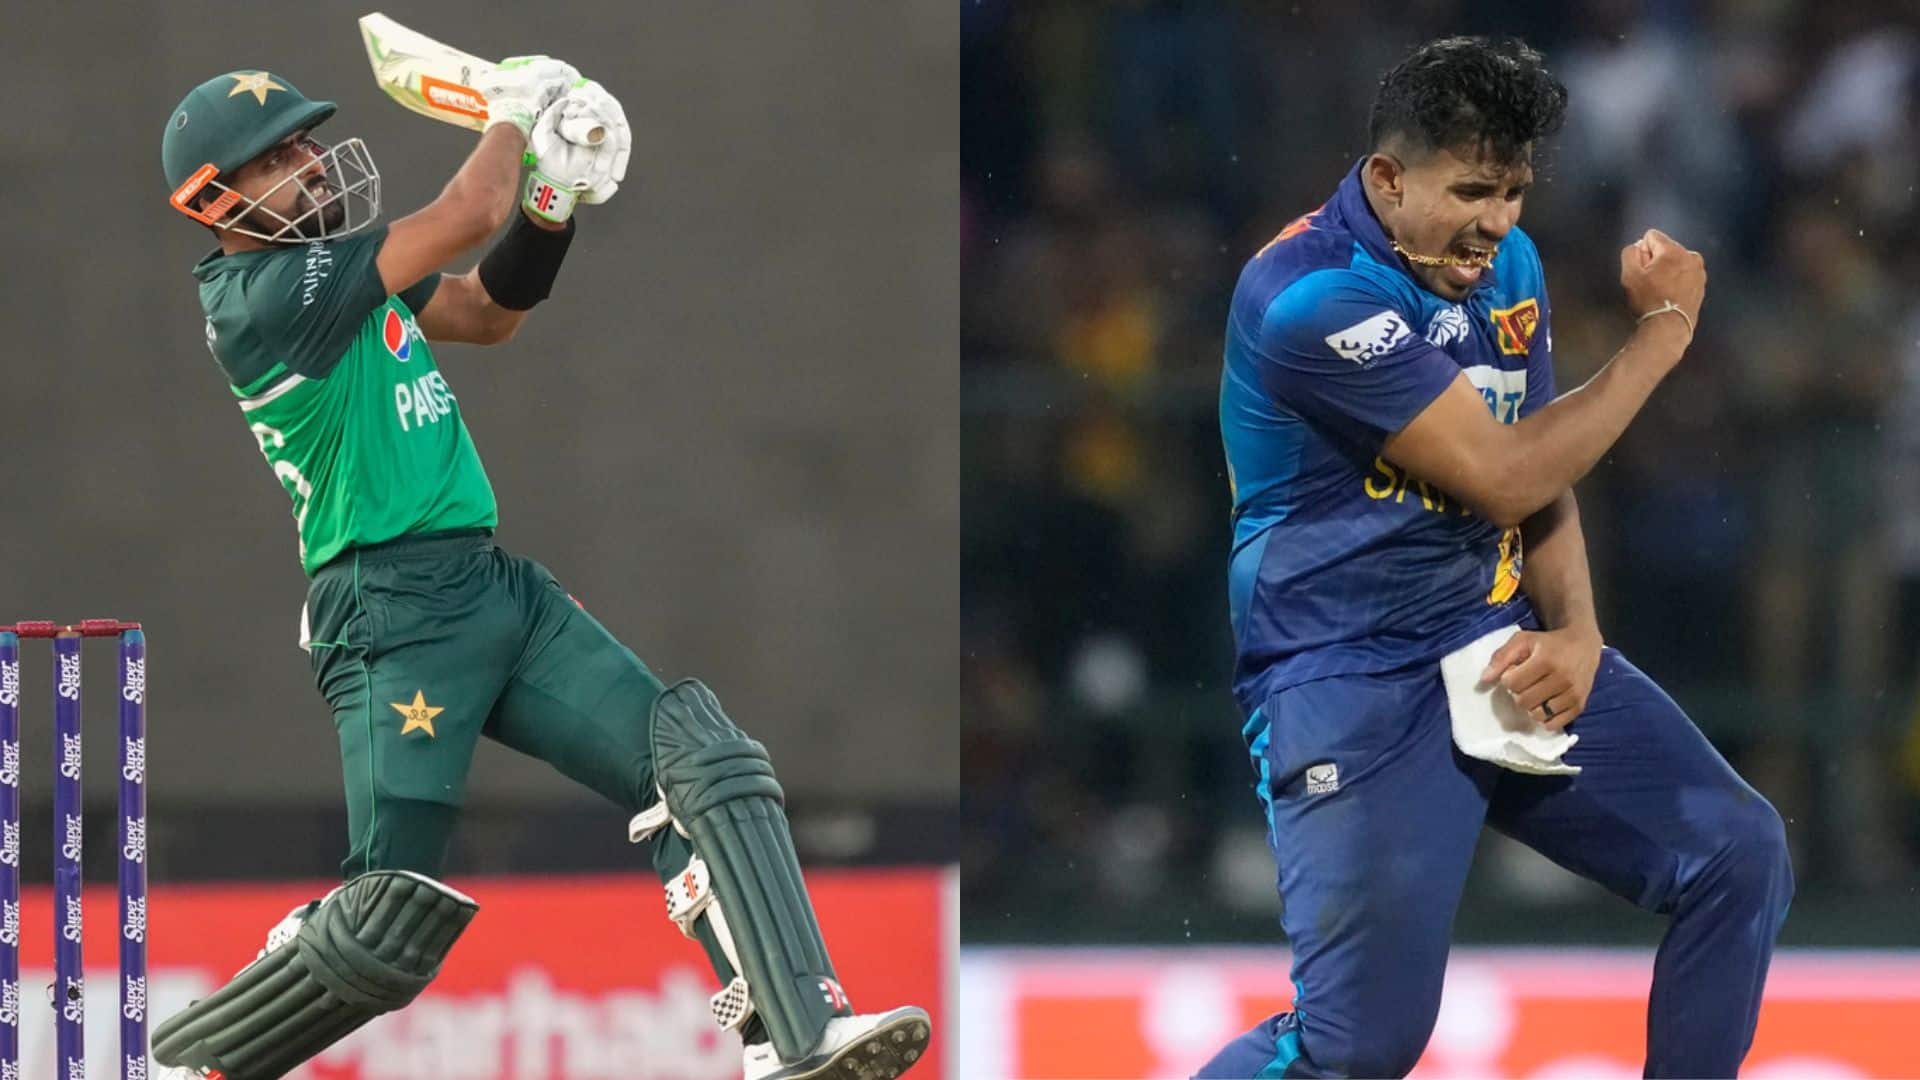 Asia Cup, PAK vs SL | 5 Player Battles To Watch Out For in Match 11